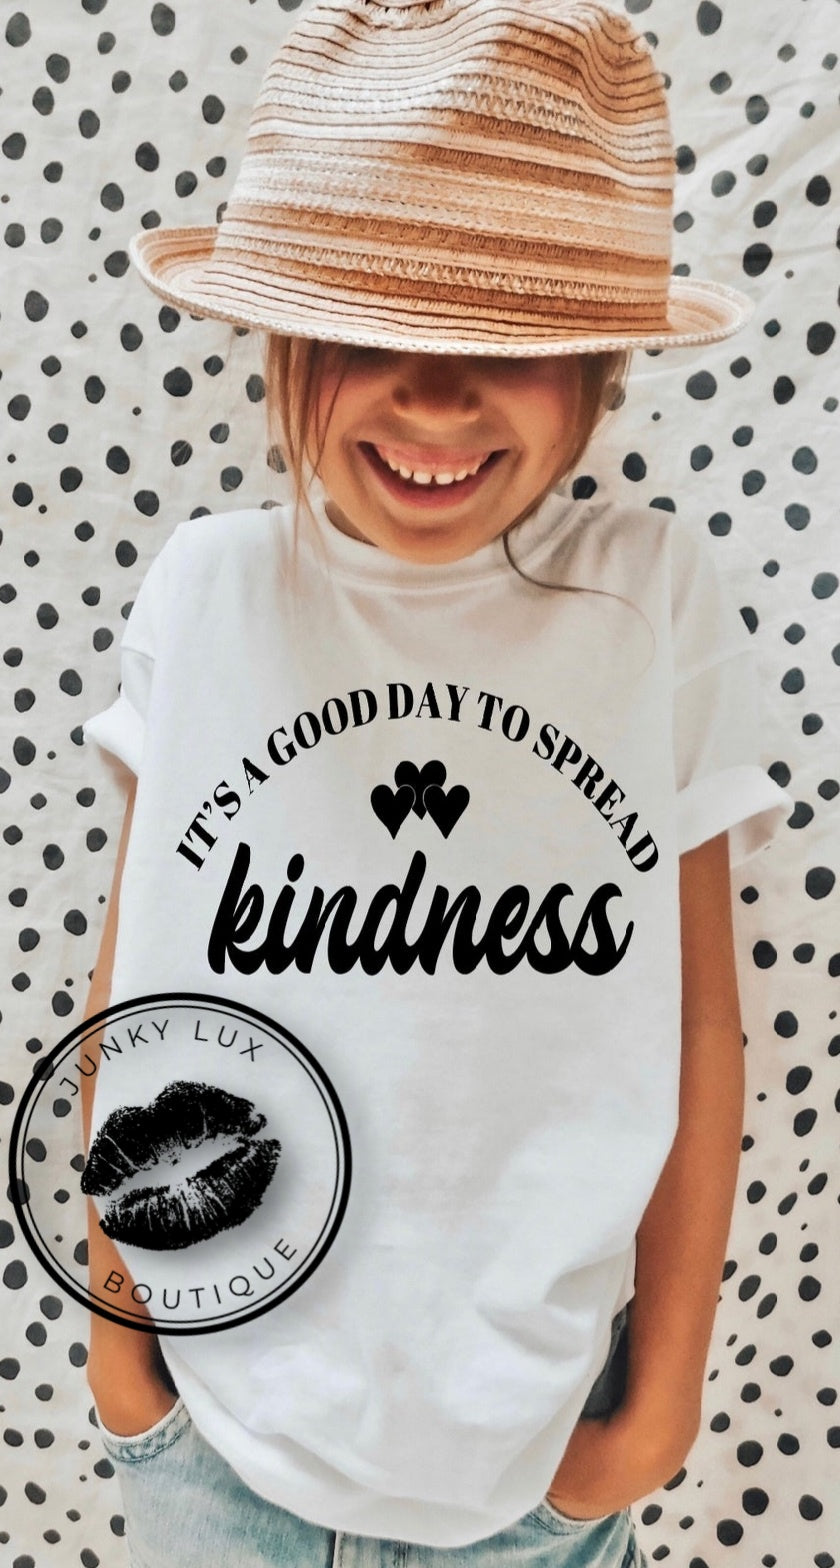 Spread Kindness-Youth